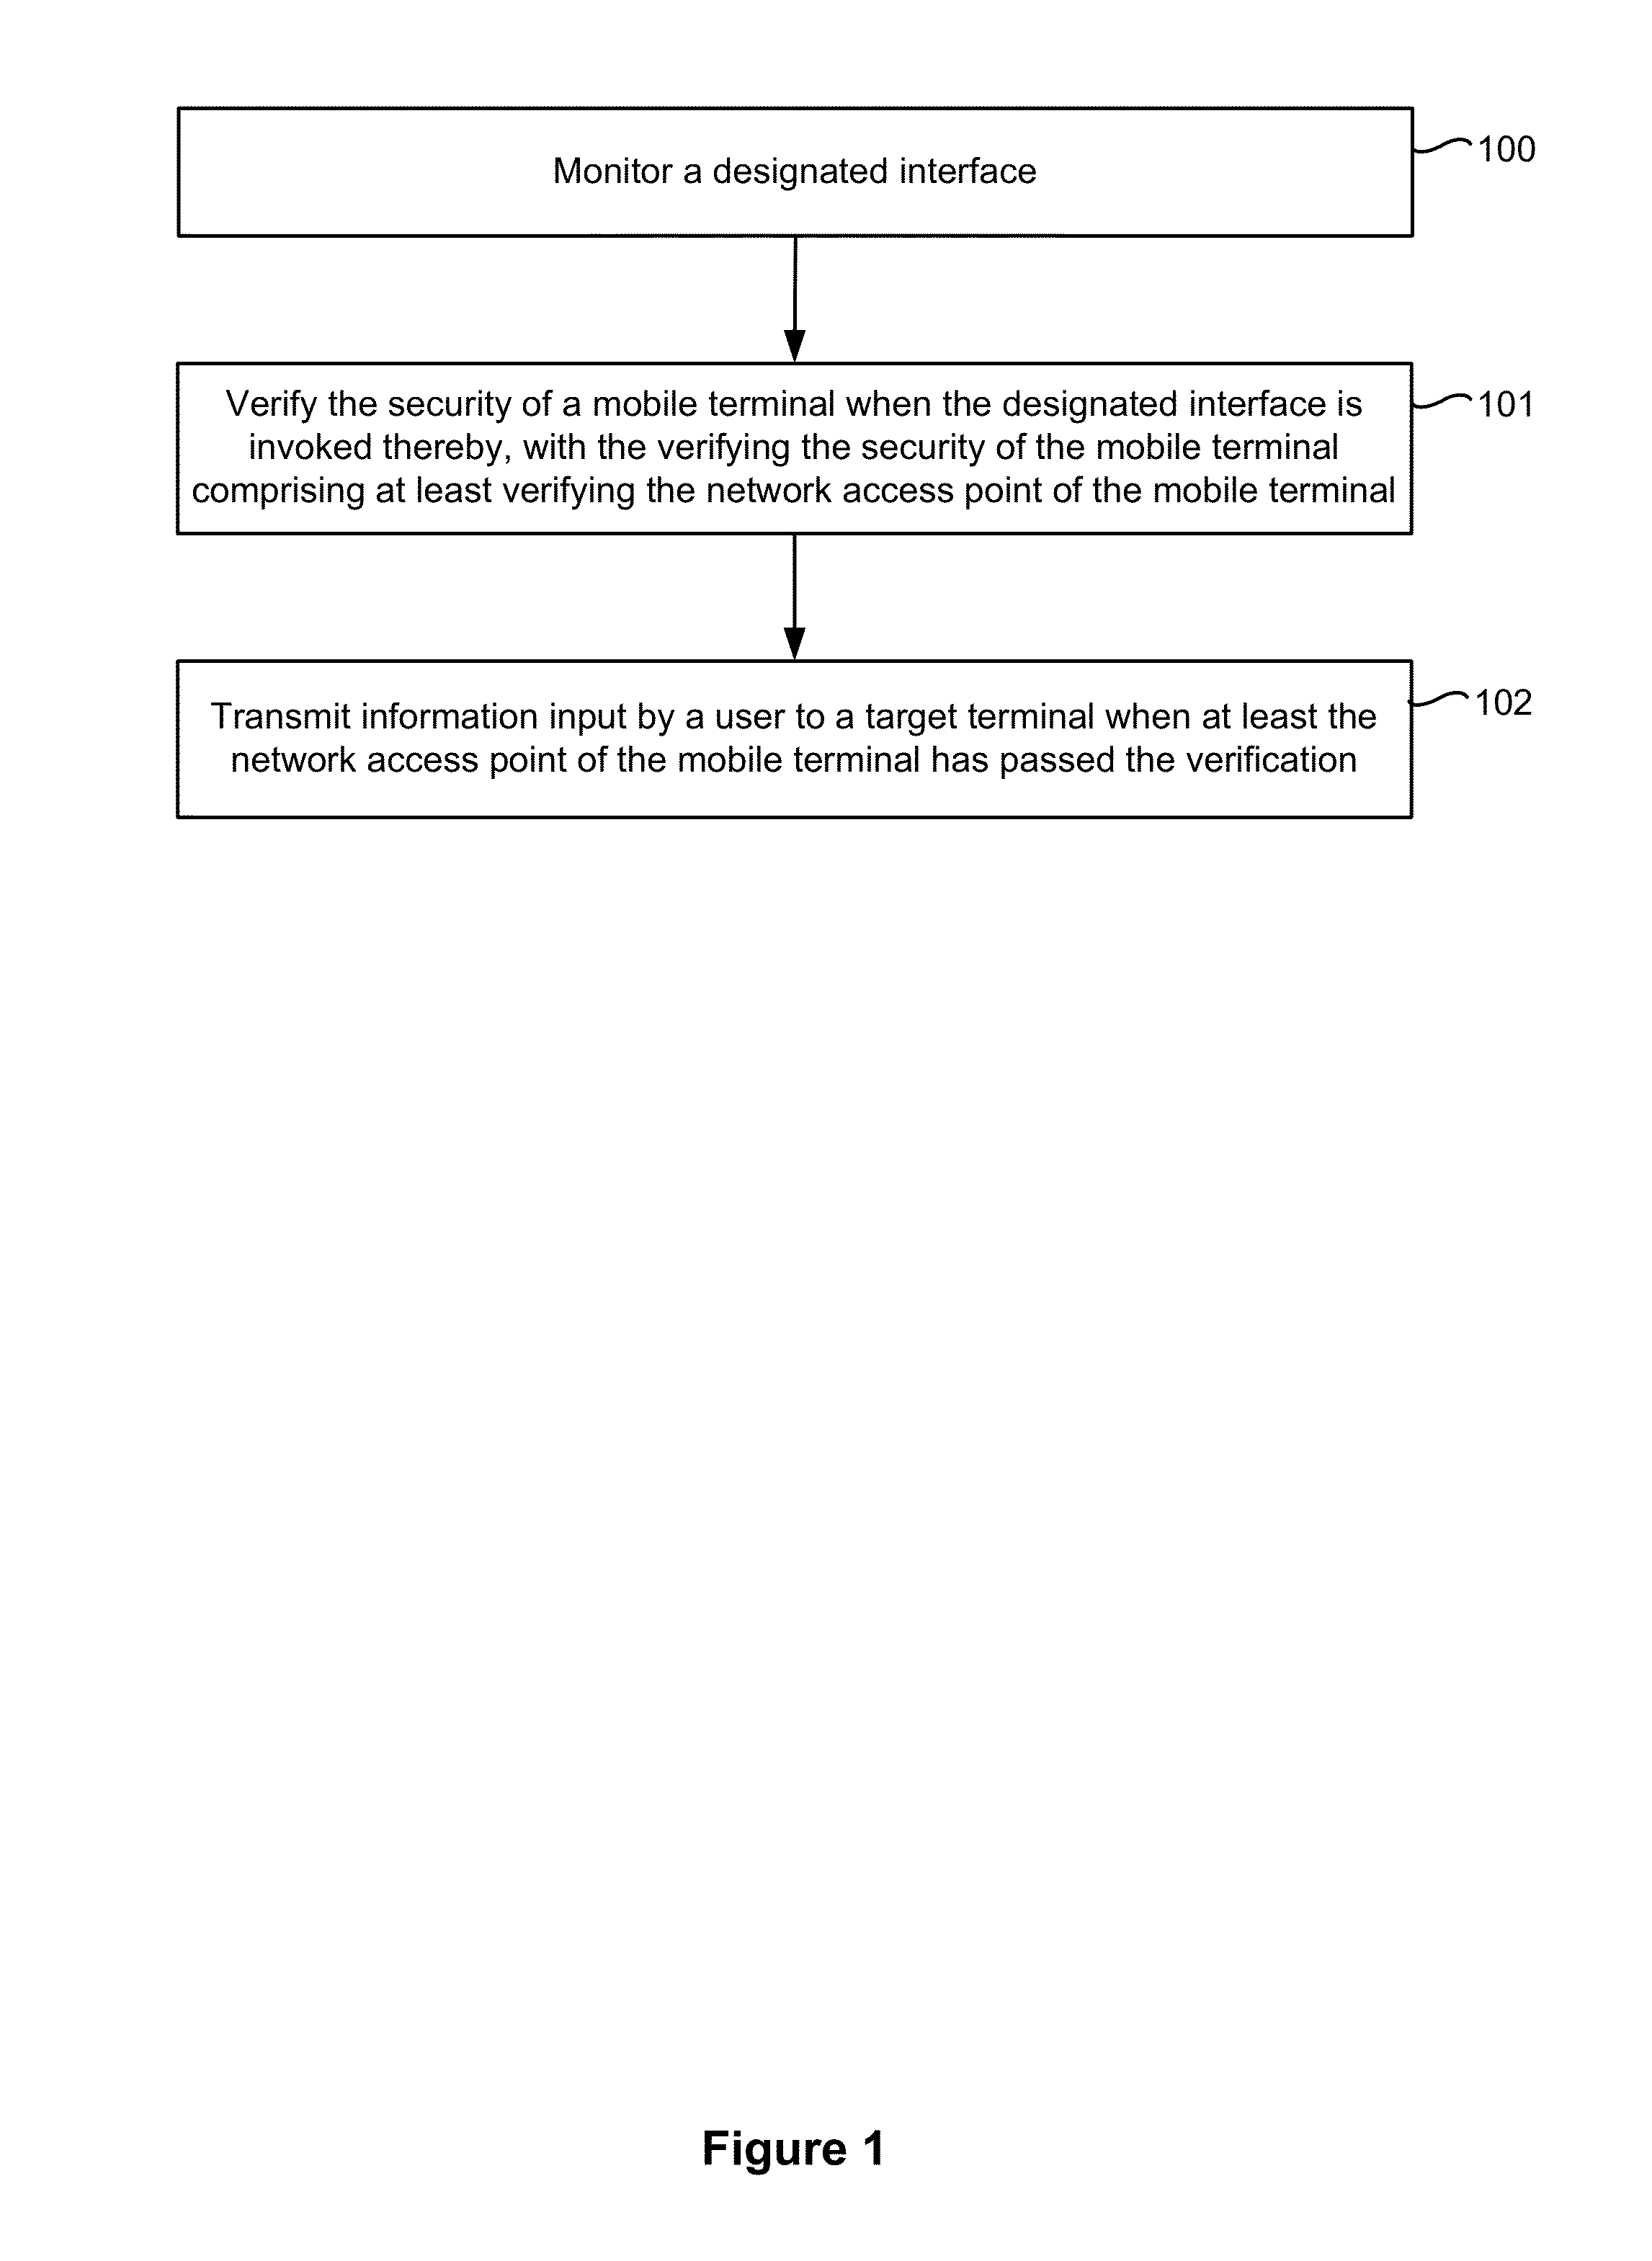 Method and device for securing an information interaction process